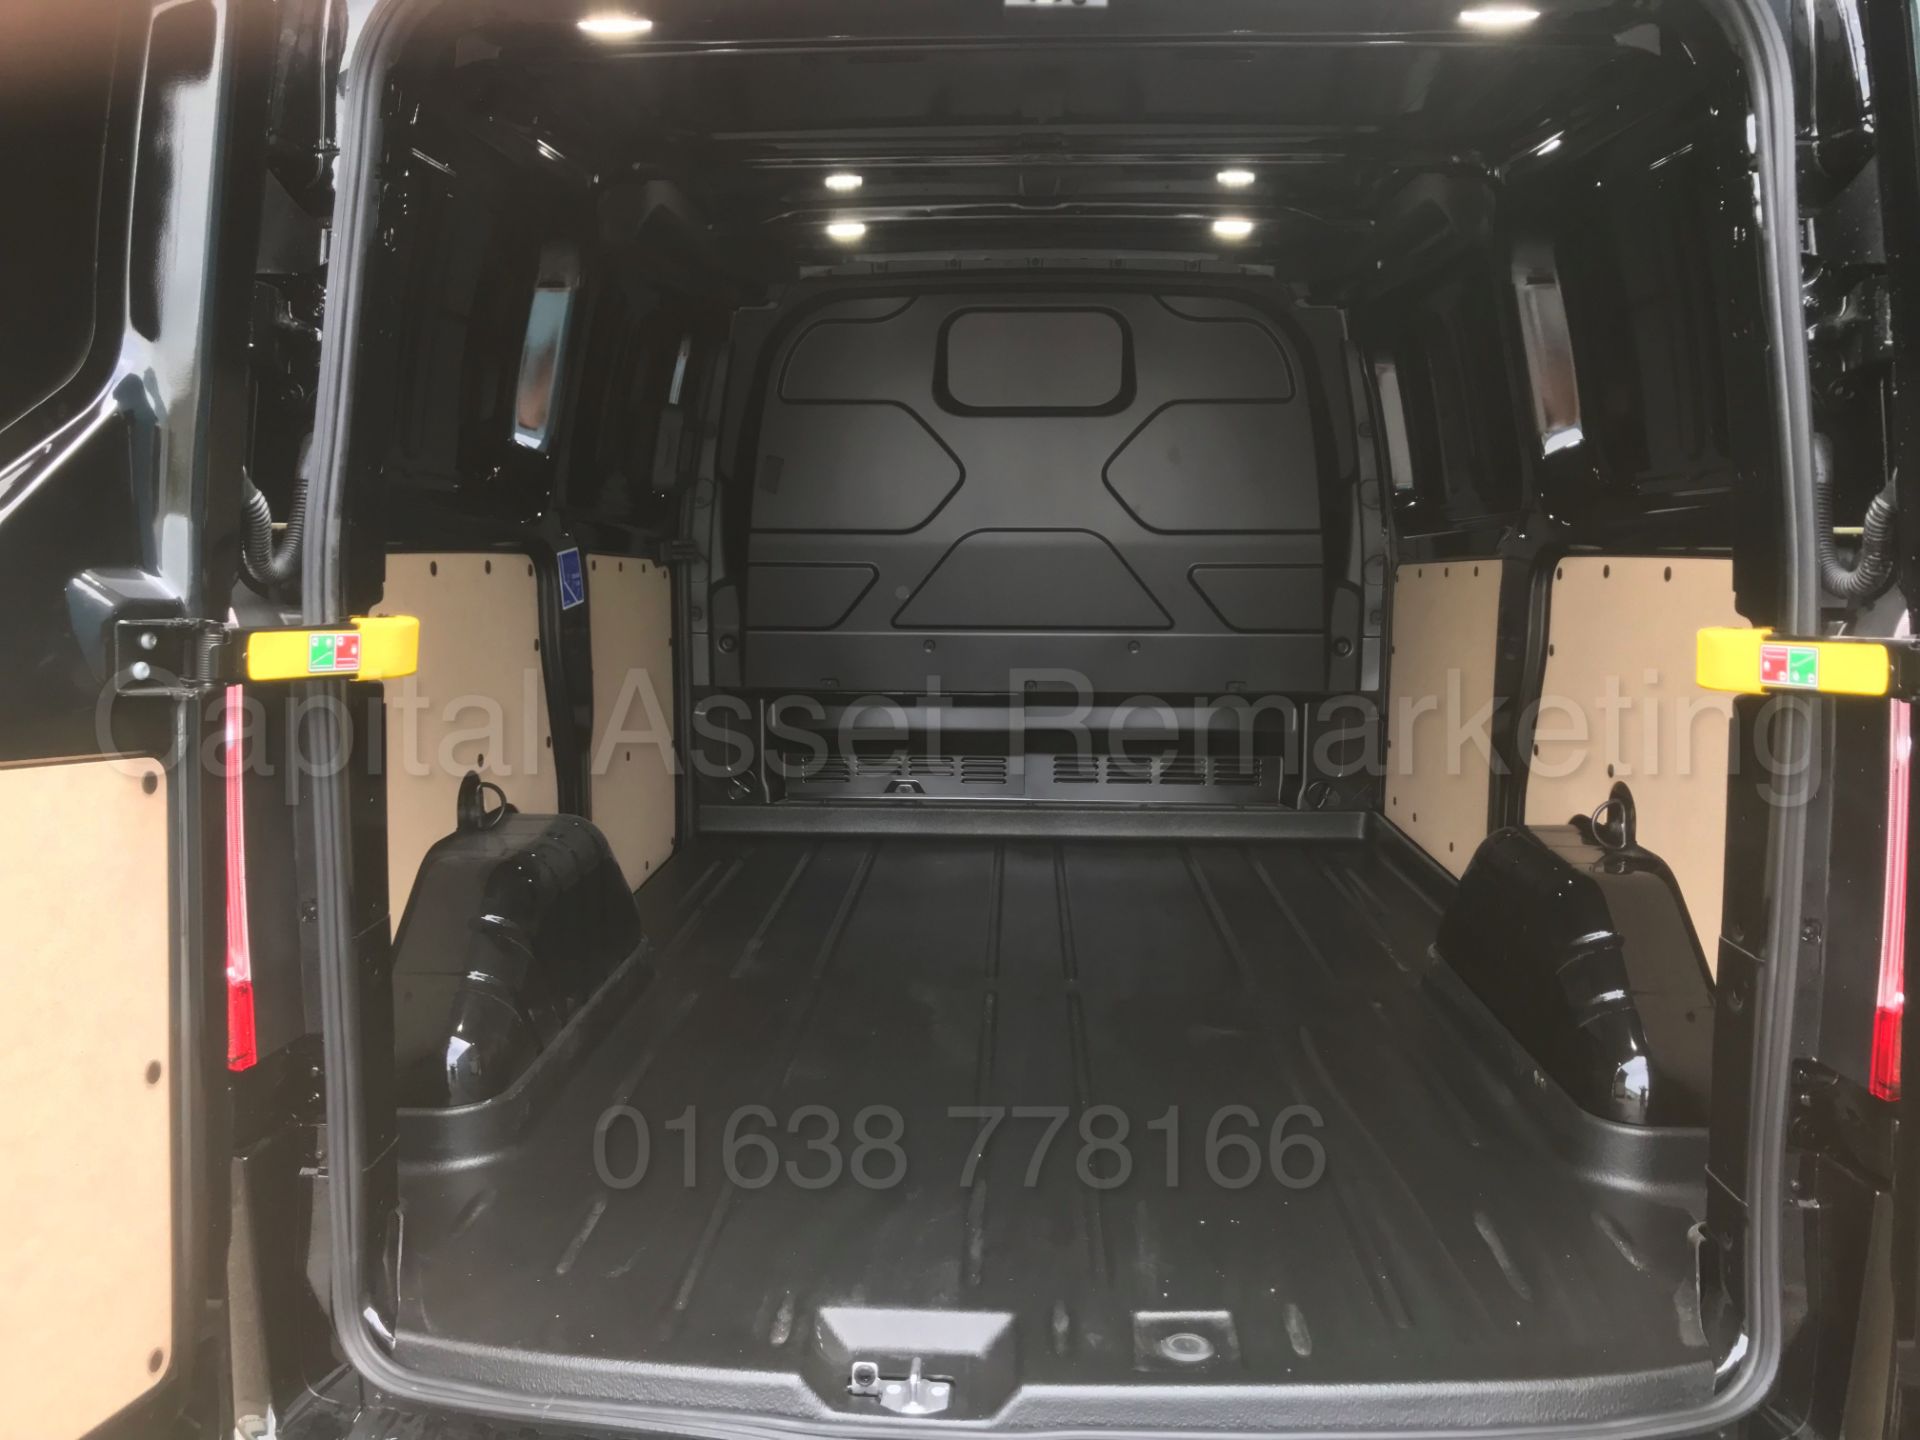 FORD TRANSIT CUSTOM *TREND EDITION* (2018 - ALL NEW MODEL) '2.0 TDCI - 6 SPEED' *DELIVERY MILEAGE* - Image 29 of 49